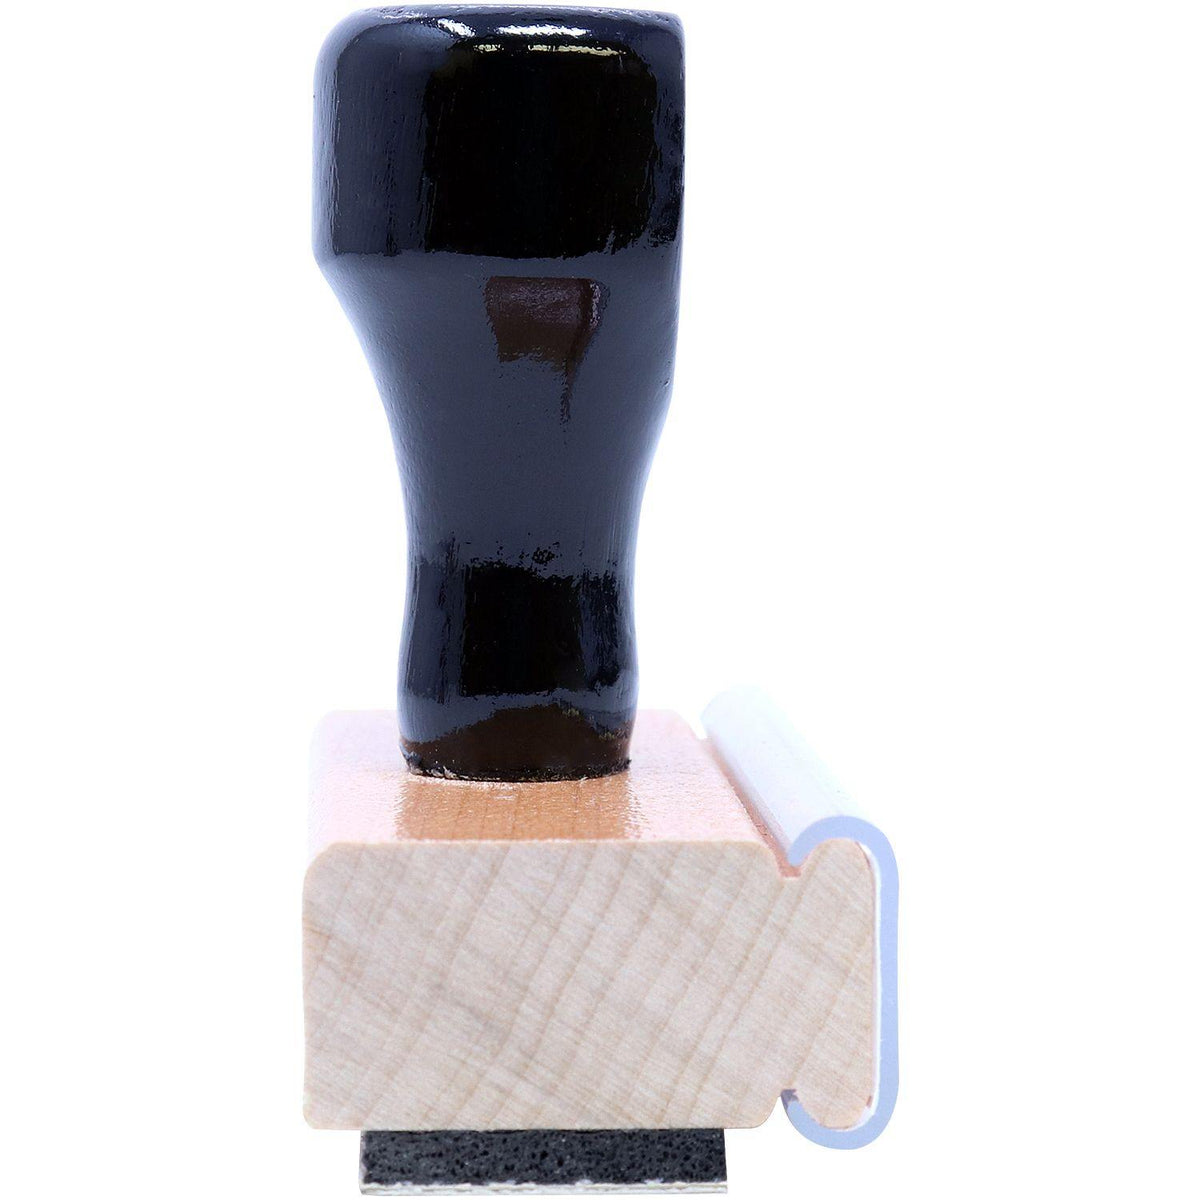 Side View of Large Atencion Inmediata Rubber Stamp